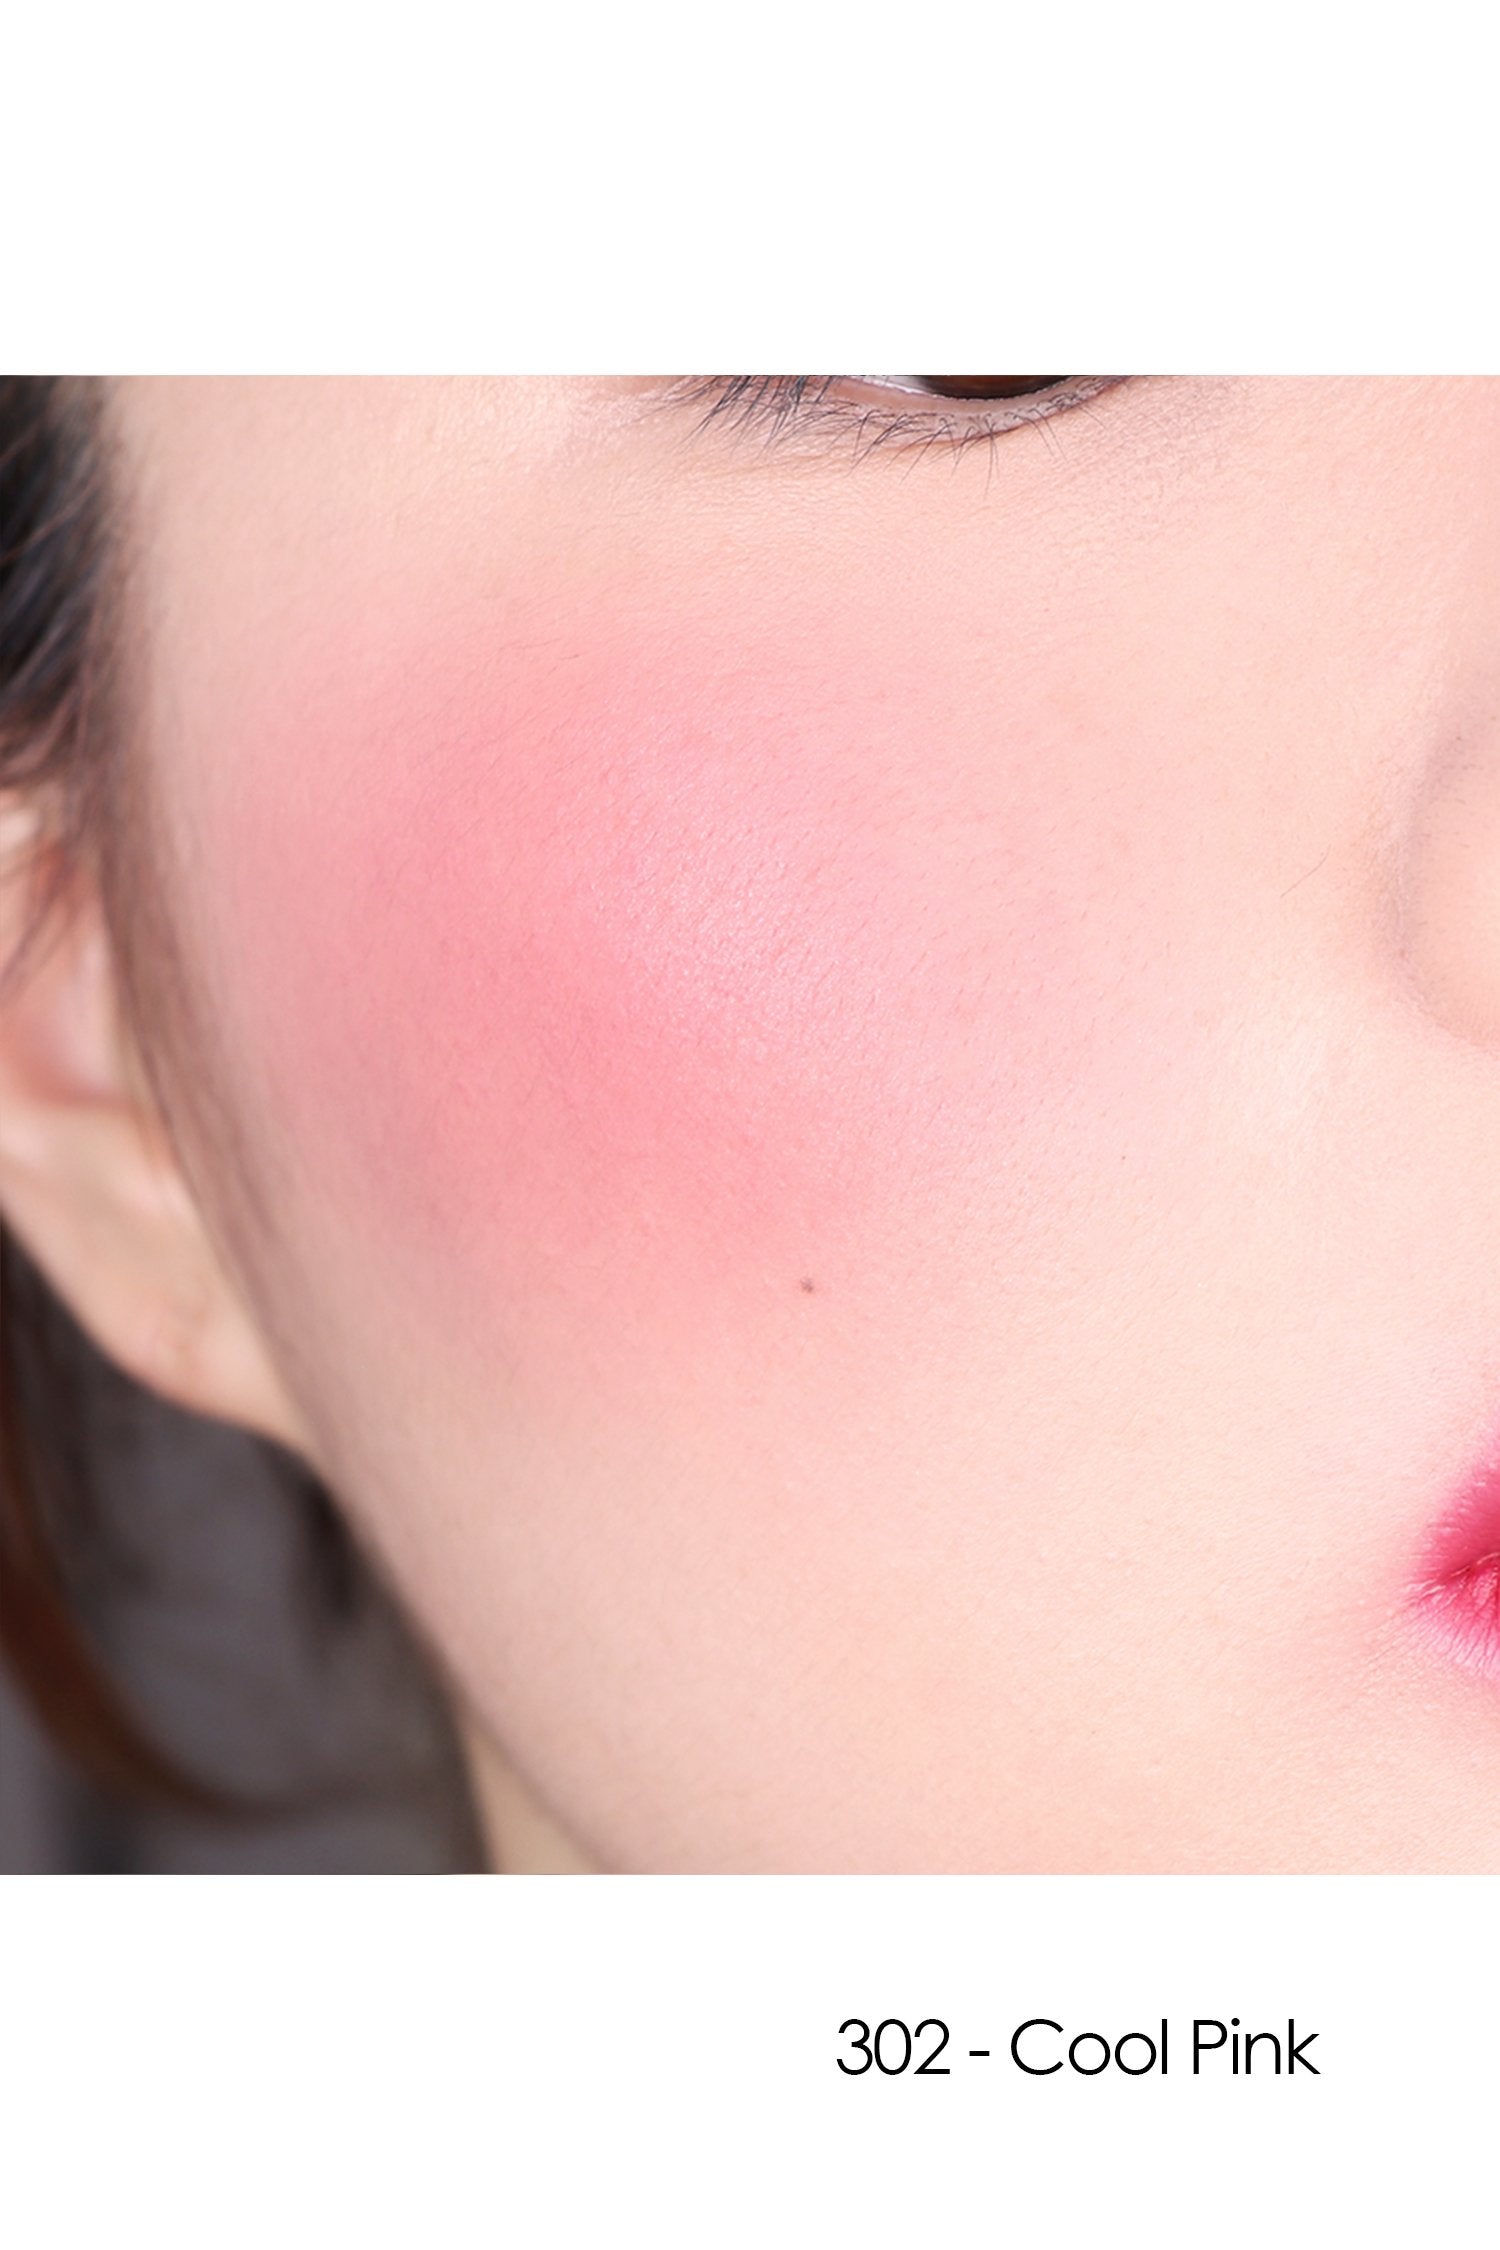 302 - Cool Pink of this powder spreads on the cheeks and clings tightly on the skin.